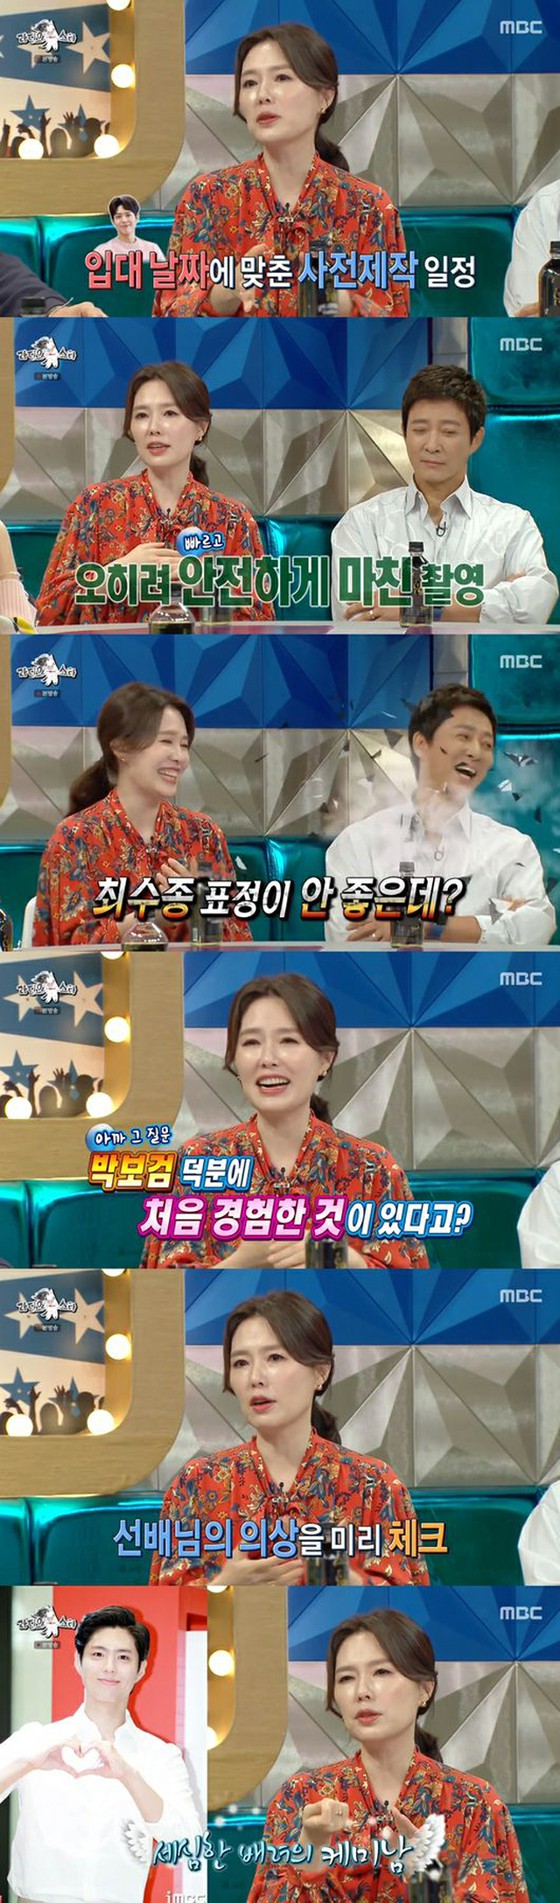 Ha Hee-ra praises Park Bo Gum who co-starred in TV Series "I was impressed by the consideration to check my costume before the production presentation" Ha Hee-ra praises Park Bo Gum who co-starred in TV Series